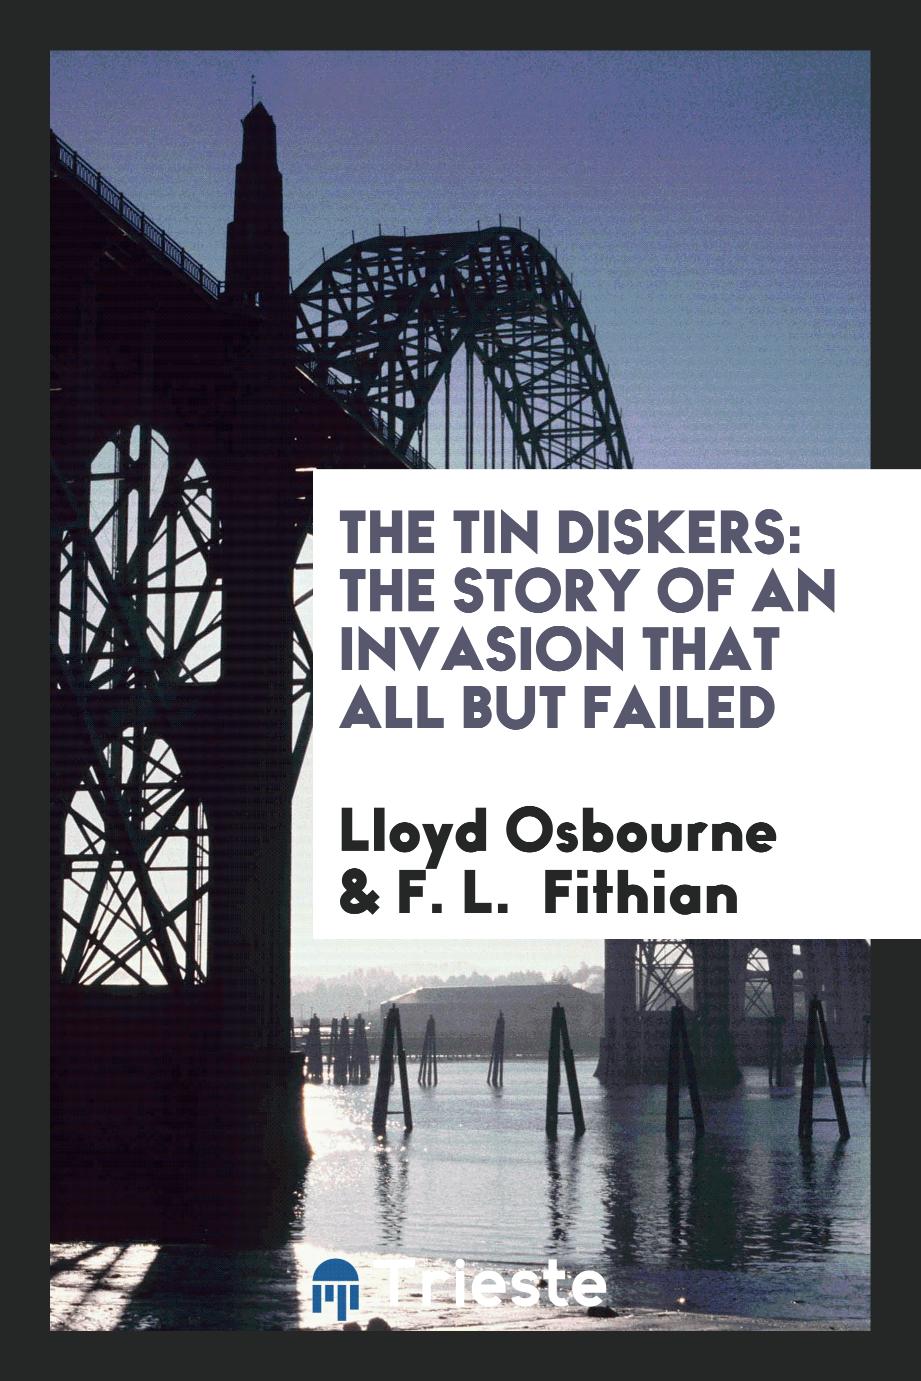 The Tin Diskers: The Story of an Invasion that All But Failed